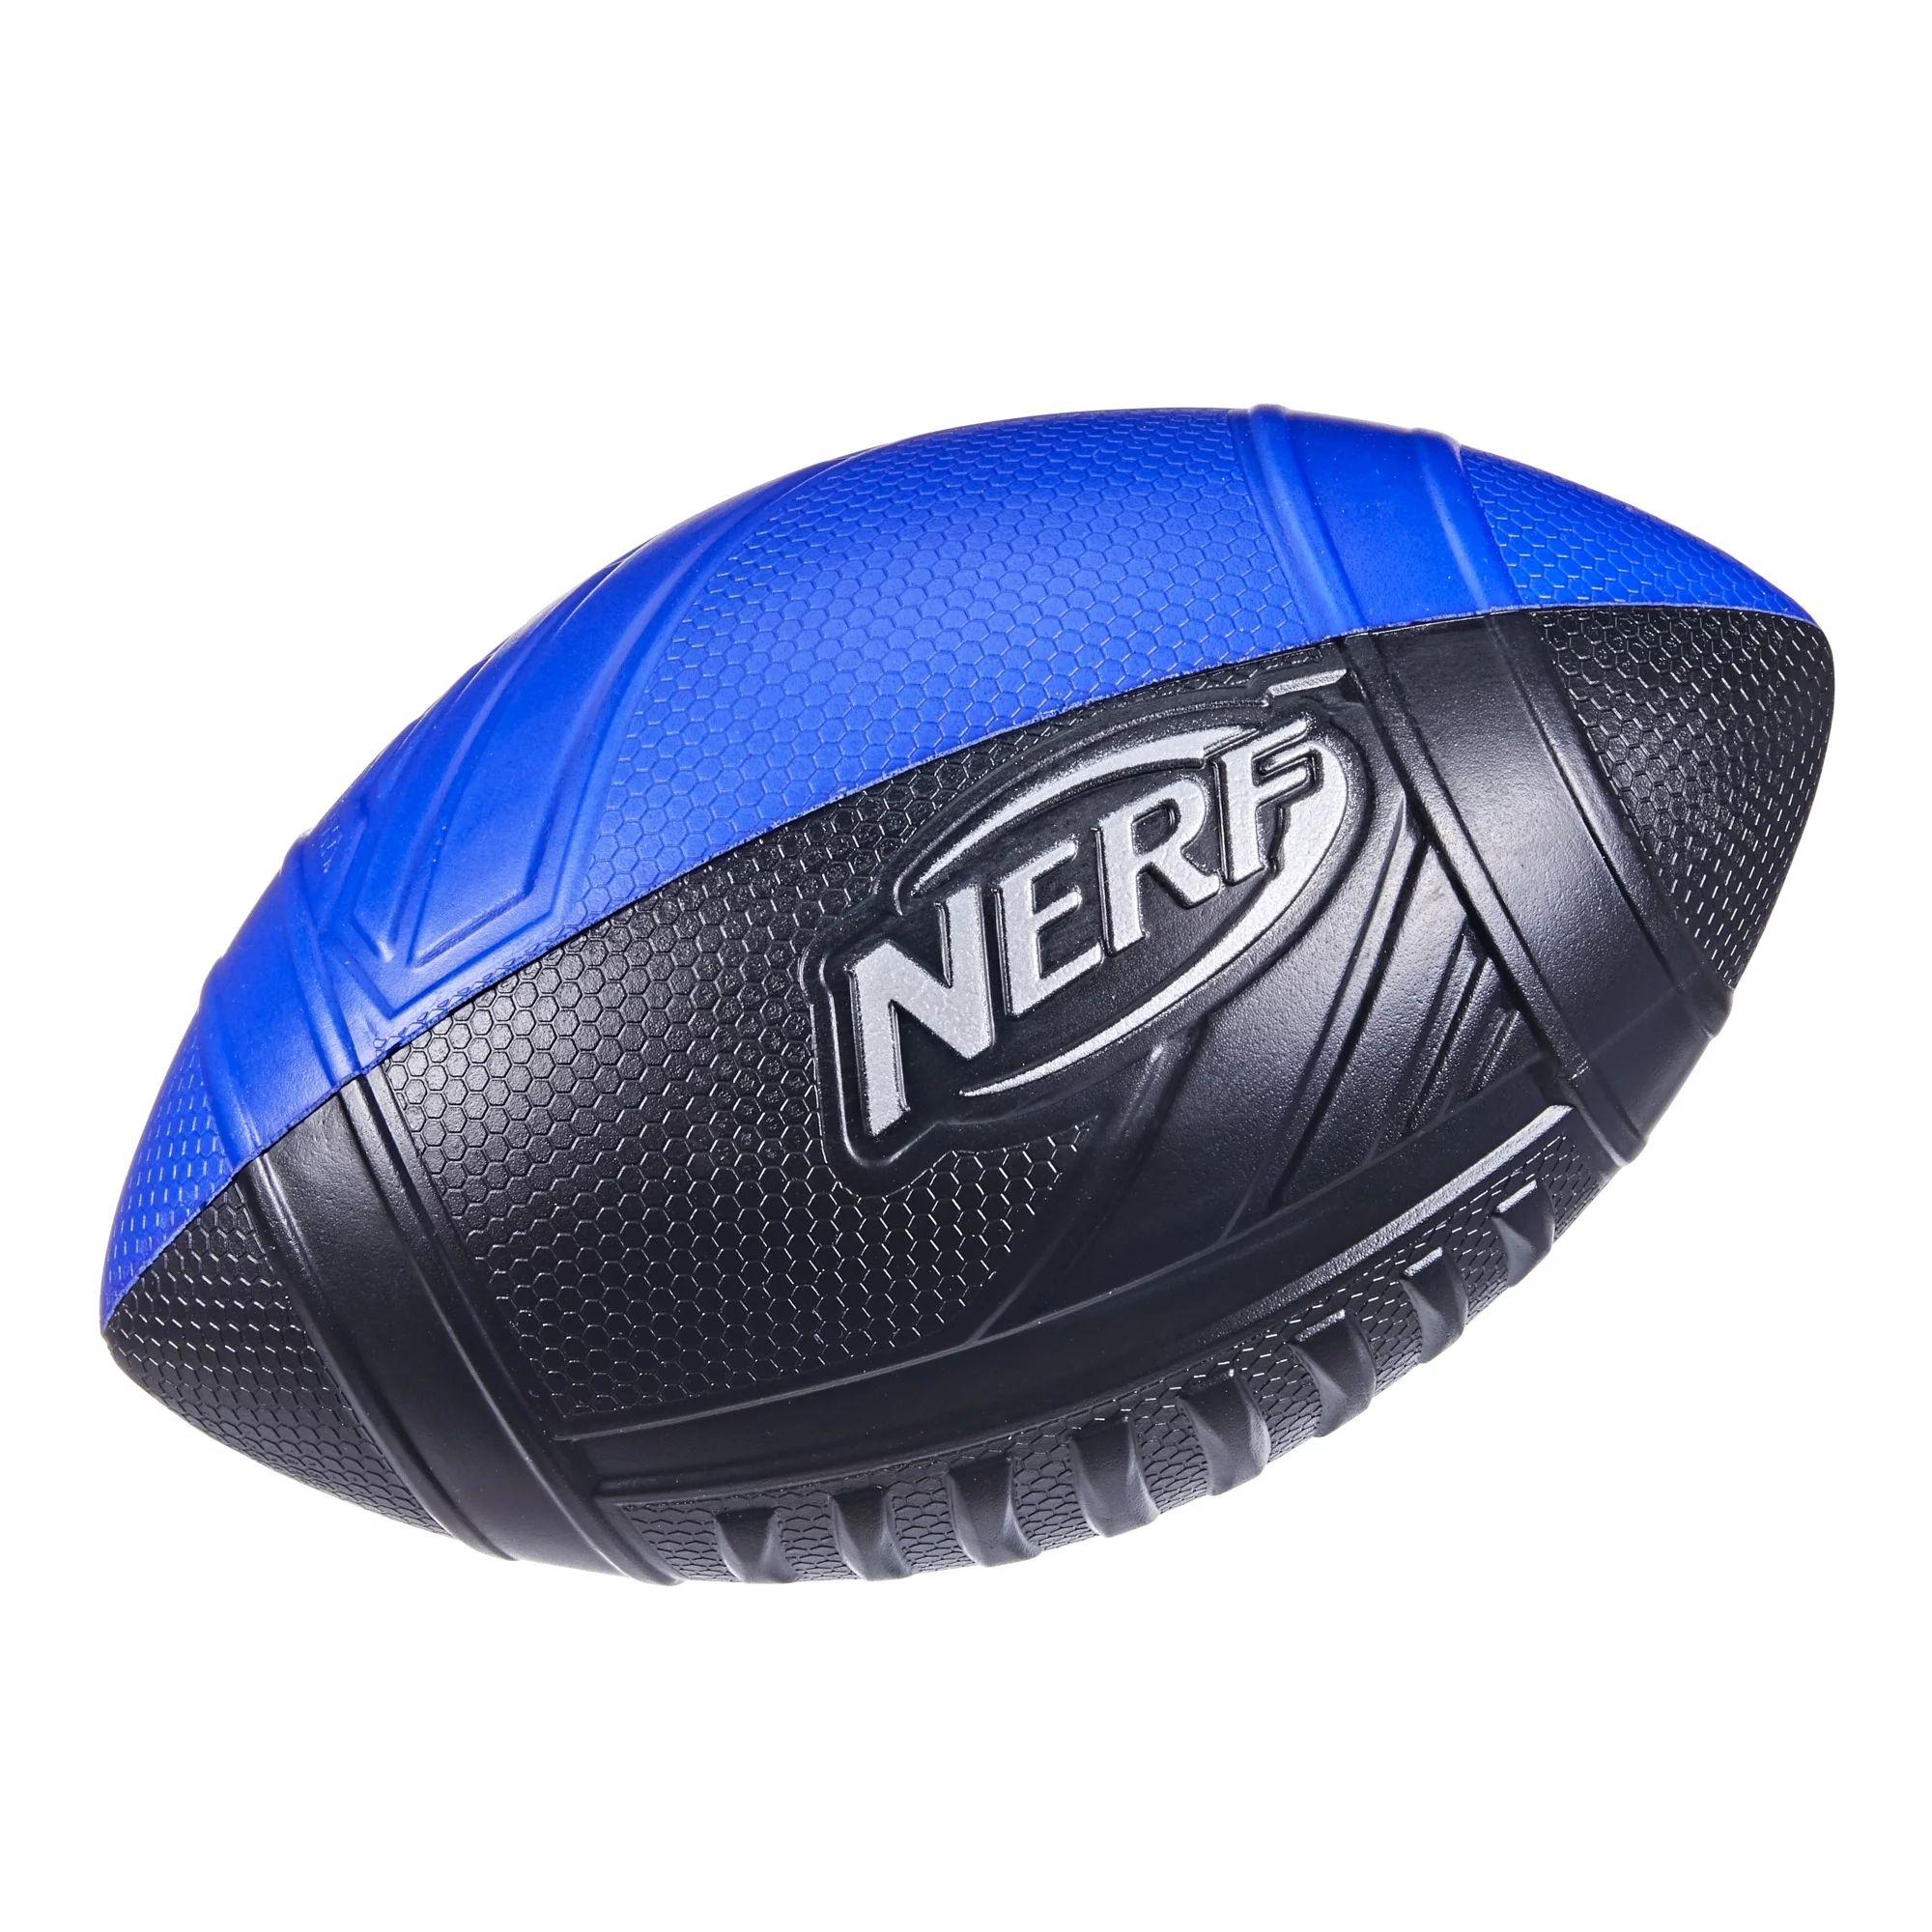 Nerf Pro Grip Classic Foam Football, Easy to Catch and Throw, Indoor Outdoor | Walmart (US)